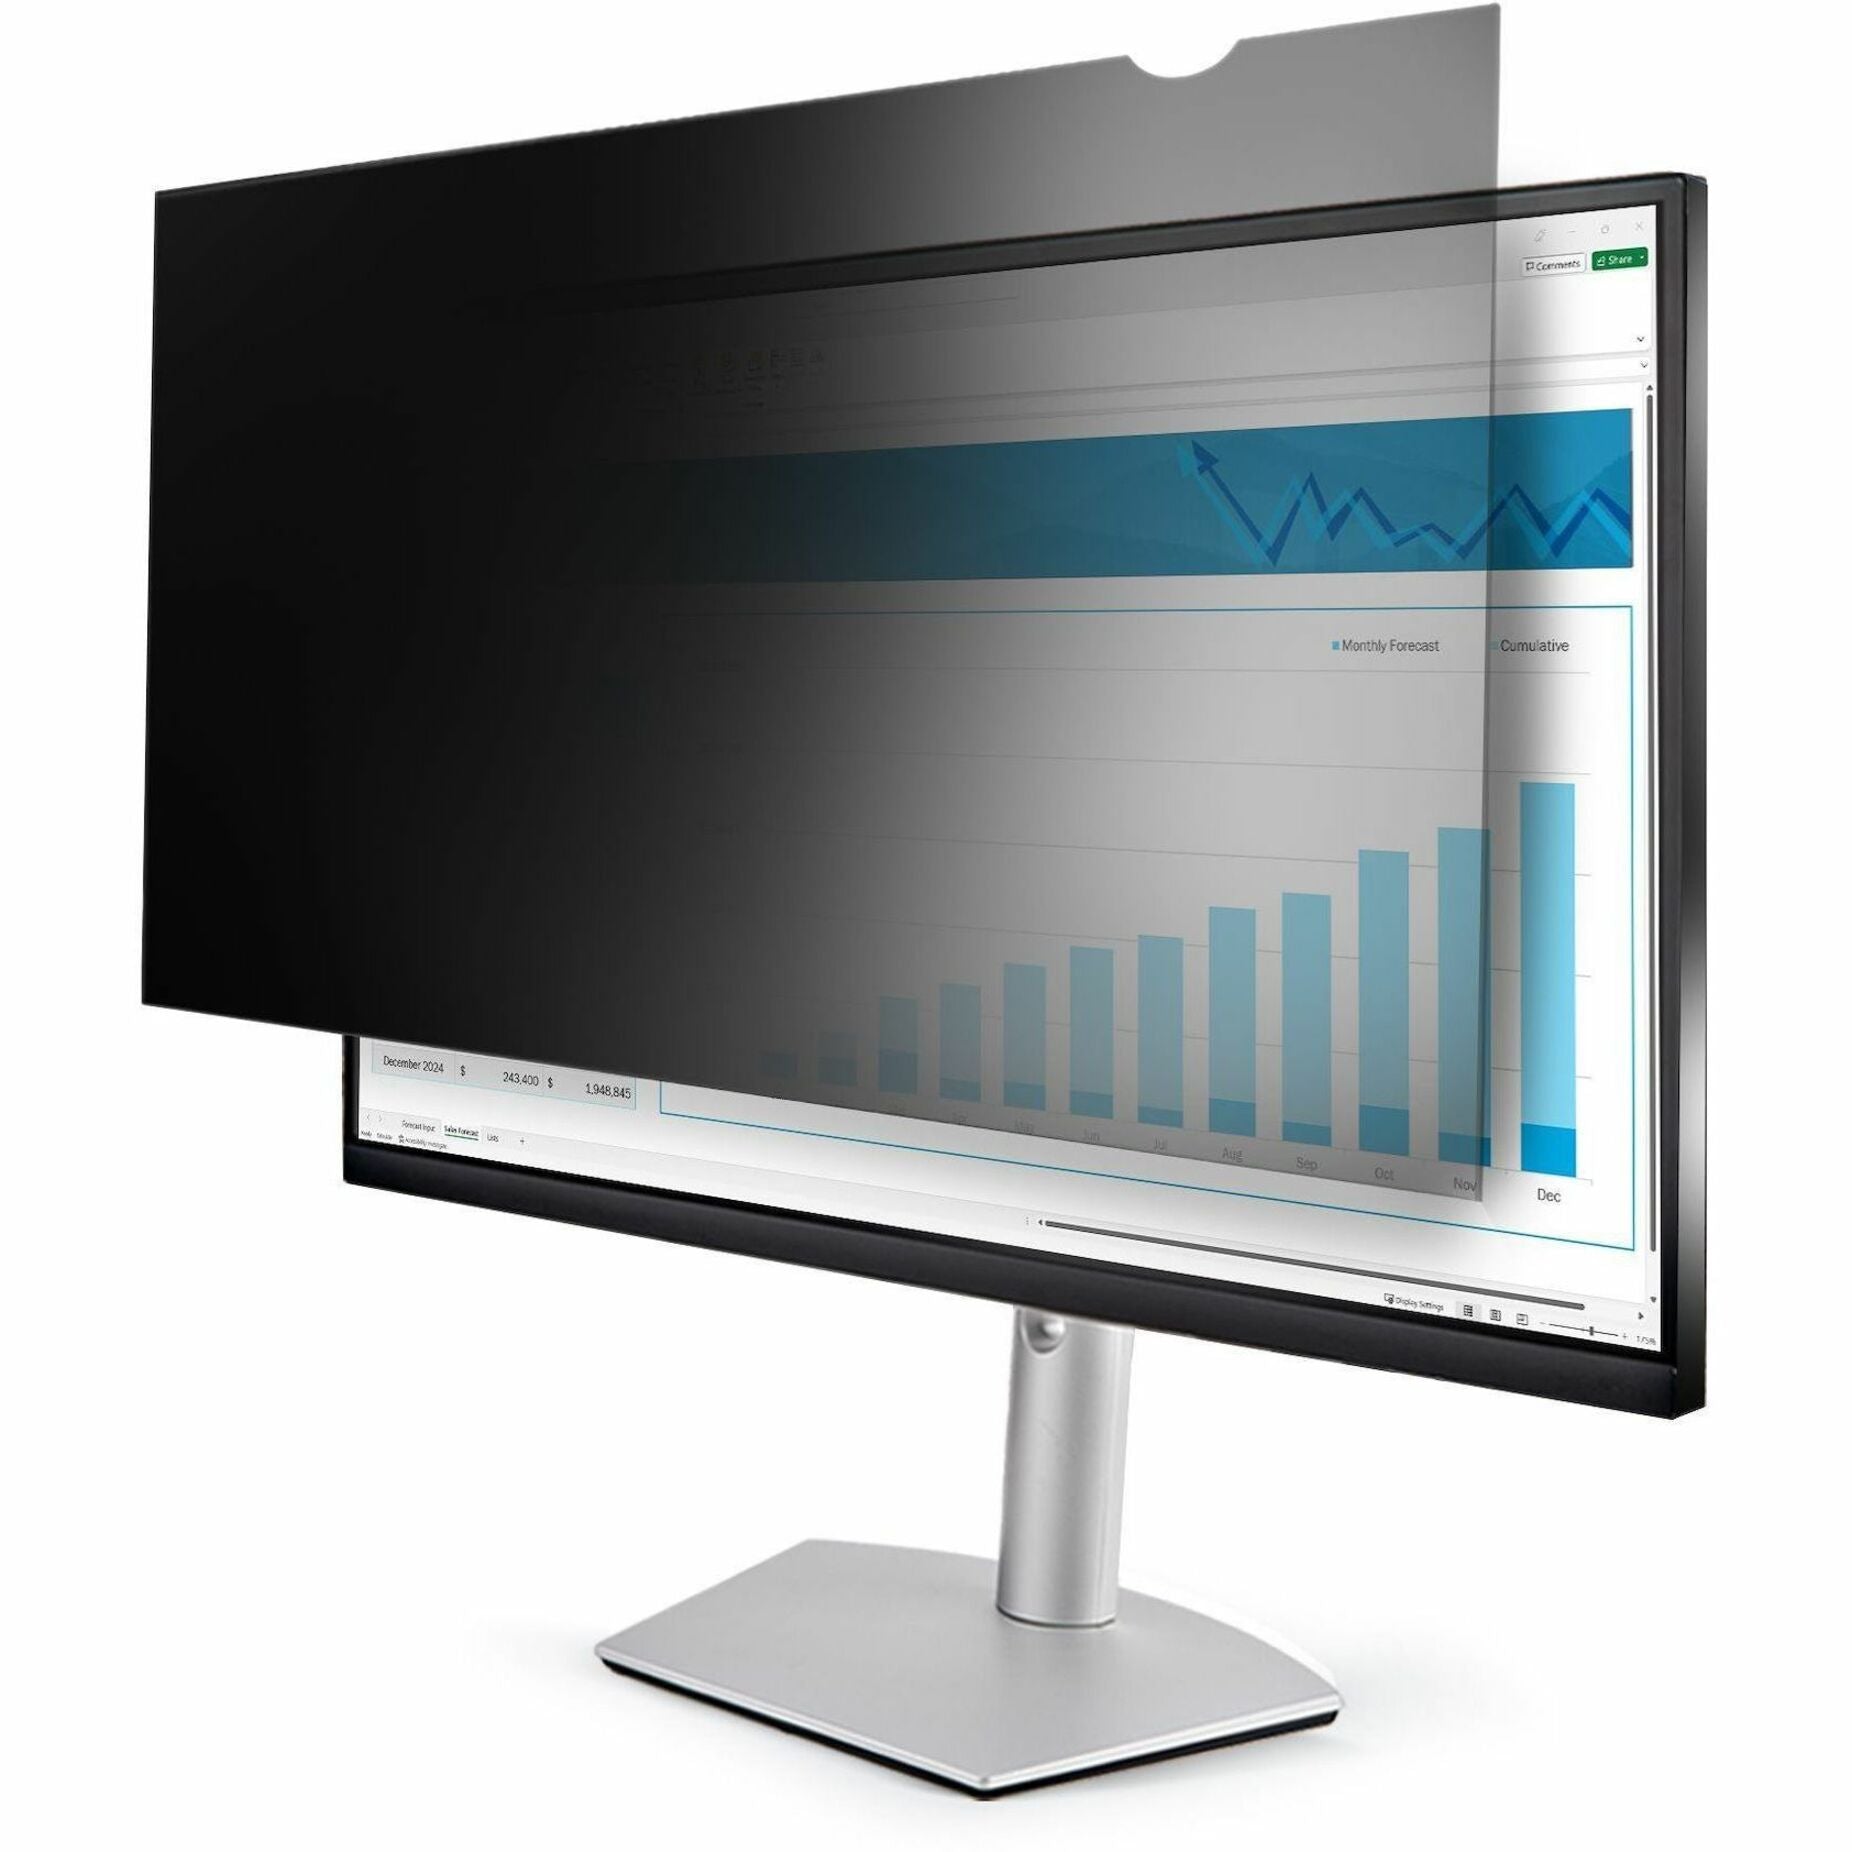 StarTech.com PRIVACY-SCREEN-23M Privacy Screen Filter, 23" Widescreen, Blue Light Reduction, Reversible Matte-to-Glossy, Easy to Apply